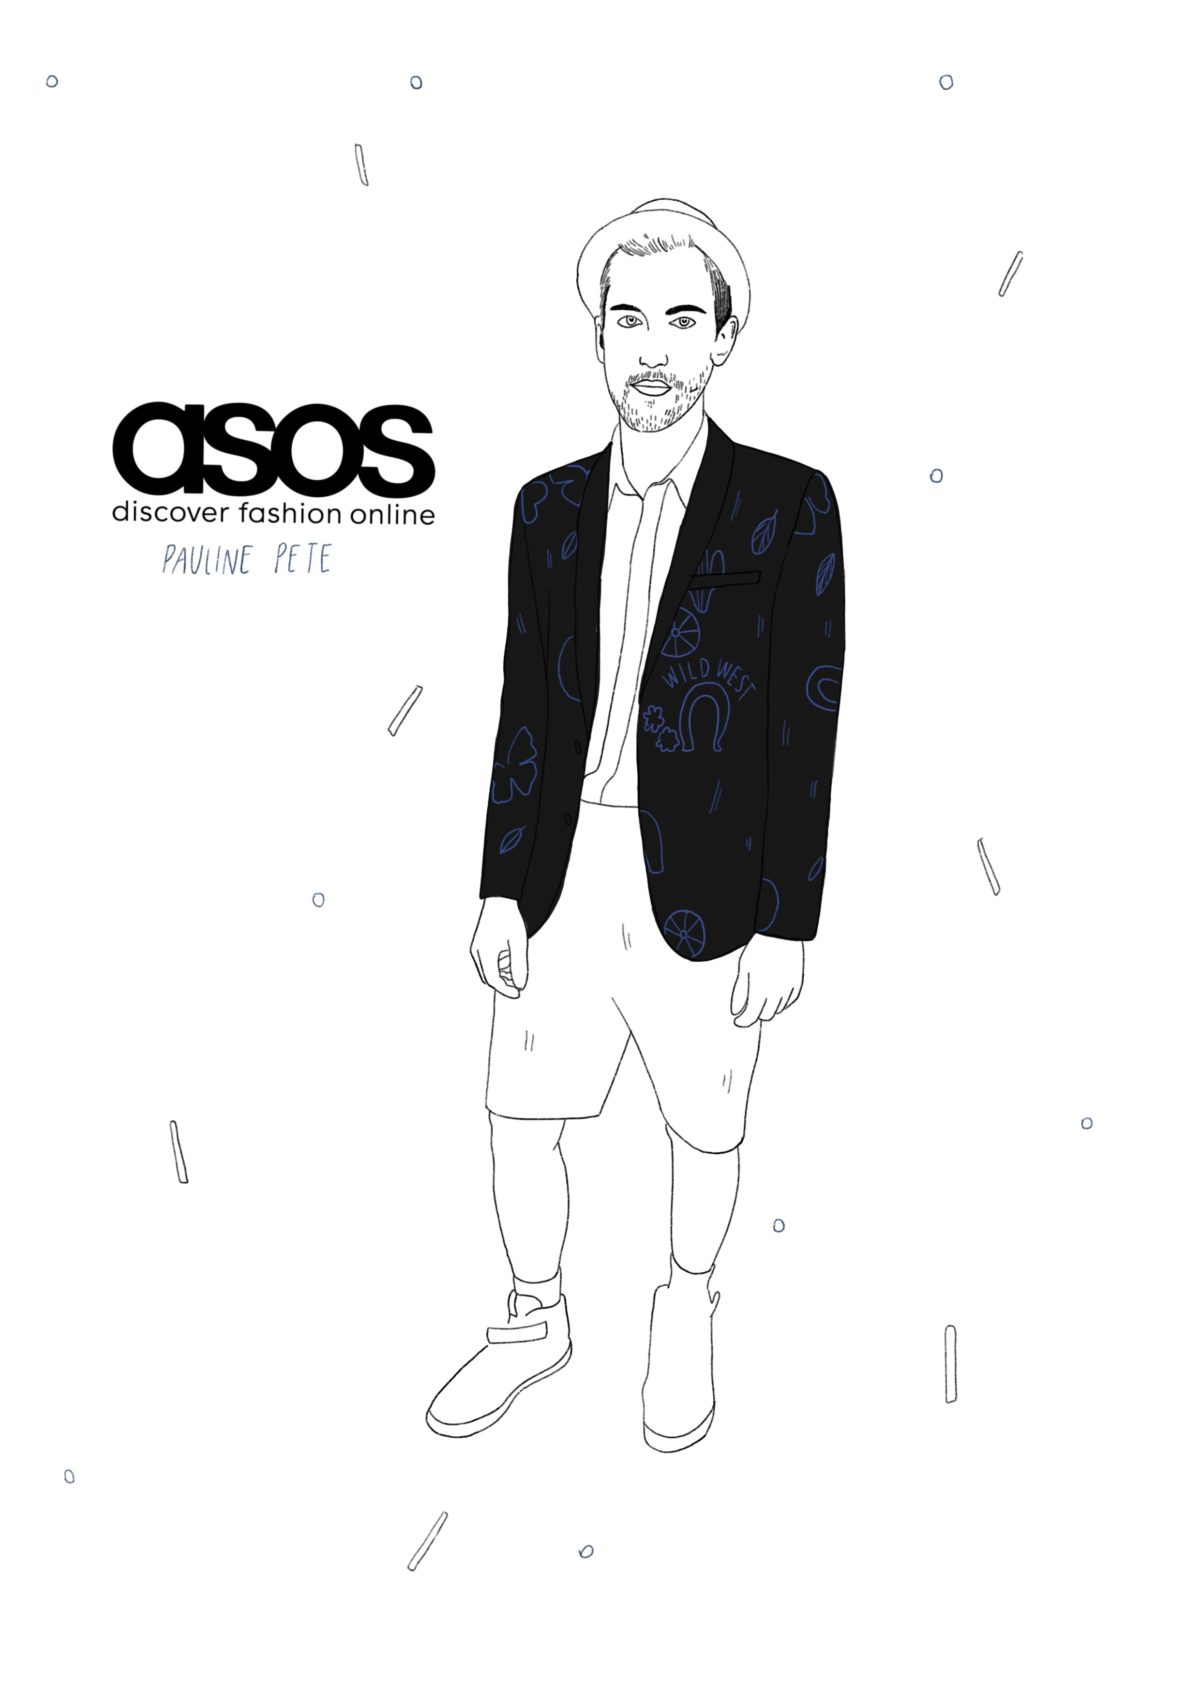 From The Archive: ASOS Illustration by Pauline Pete